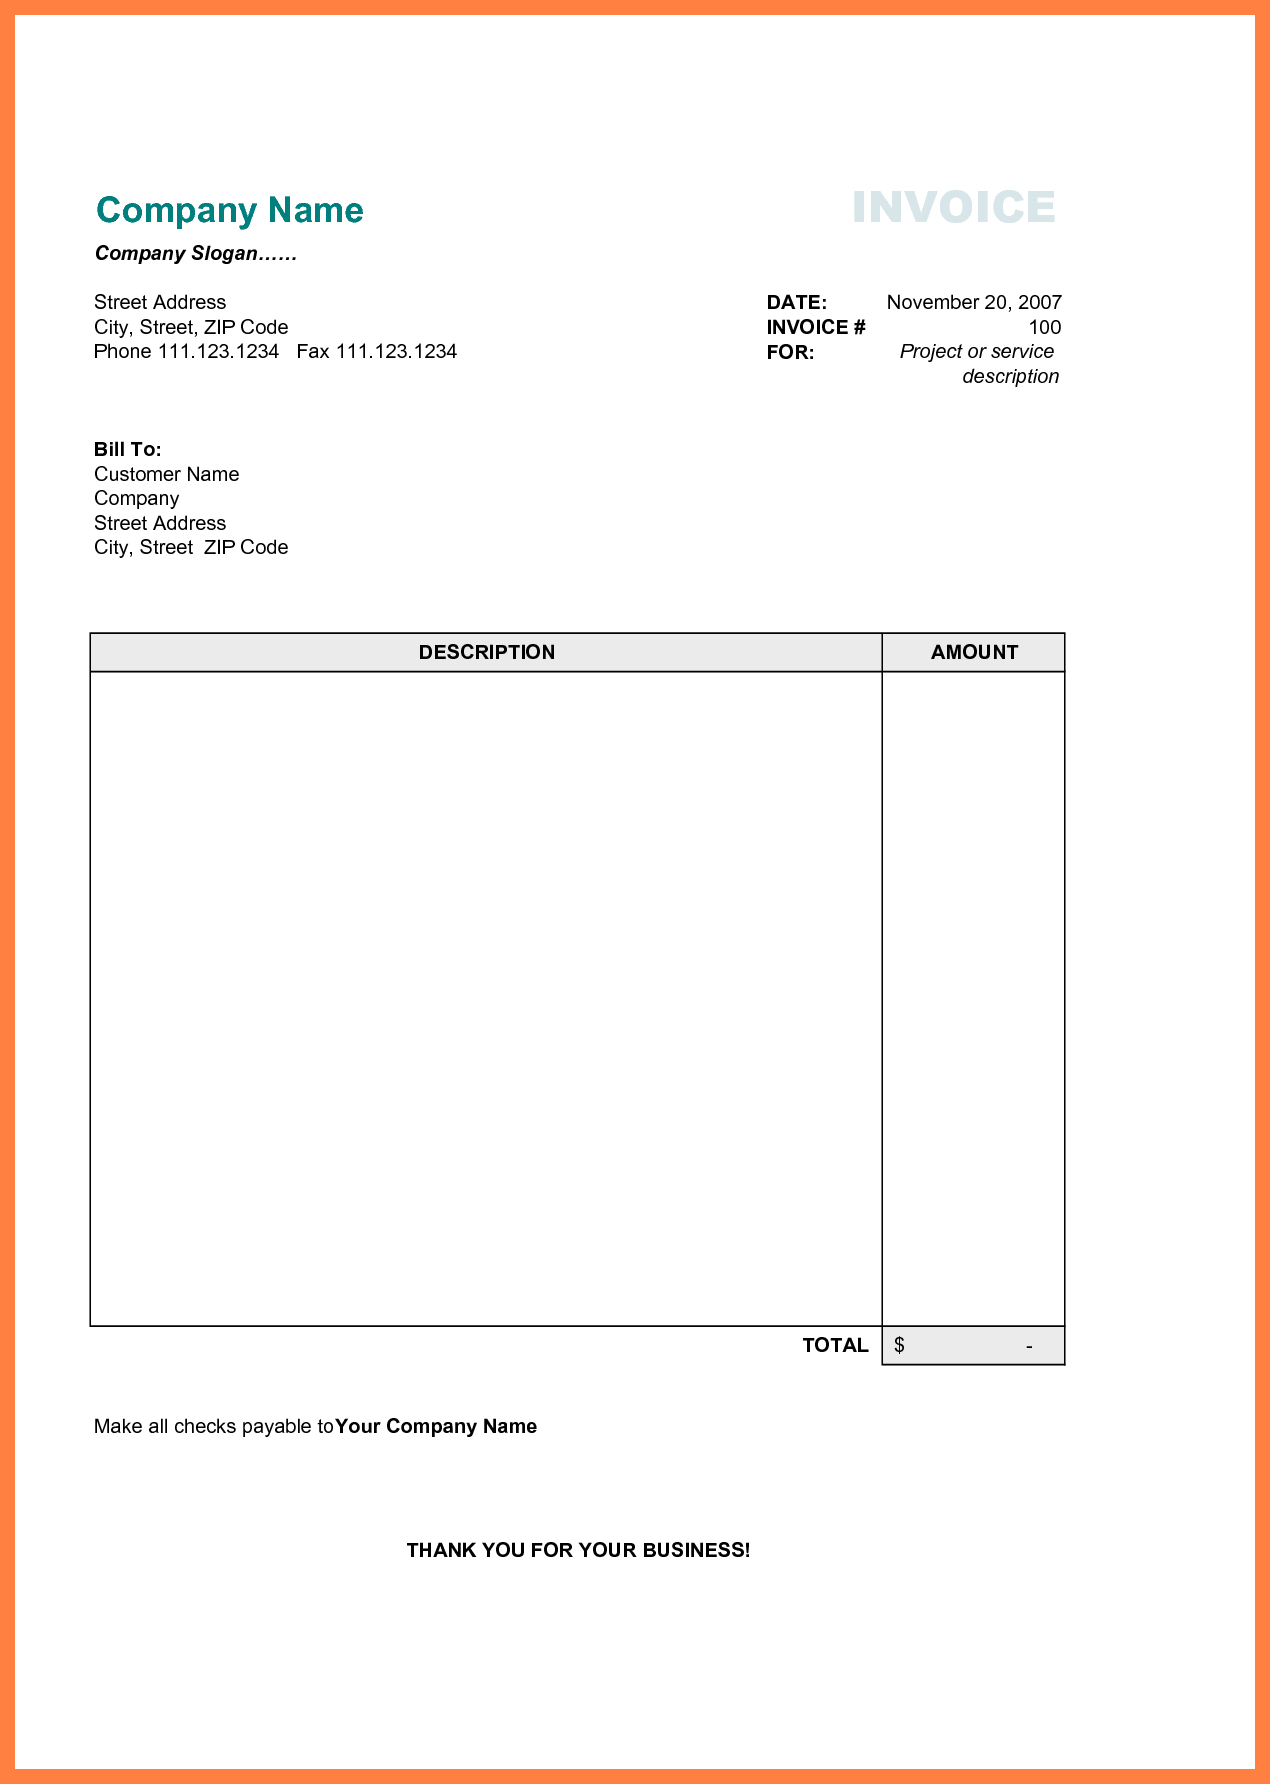 Free Printable Business Invoice Template - Invoice Format In within Free Printable Invoice Template Microsoft Word